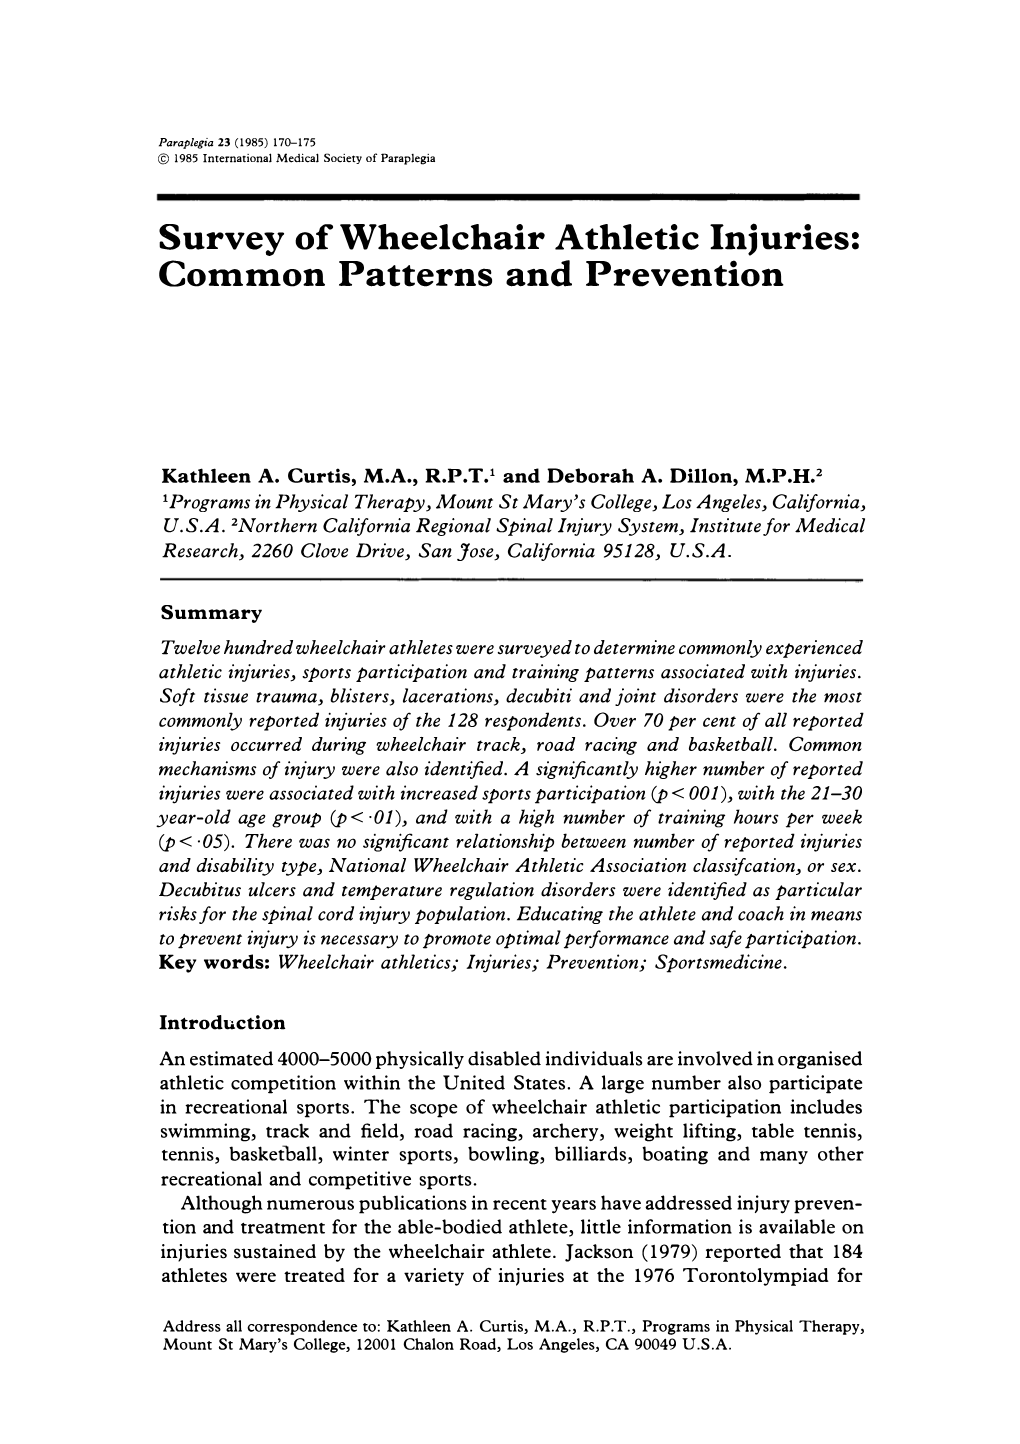 Survey of Wheelchair Athletic Injuries: Common Patterns and Prevention